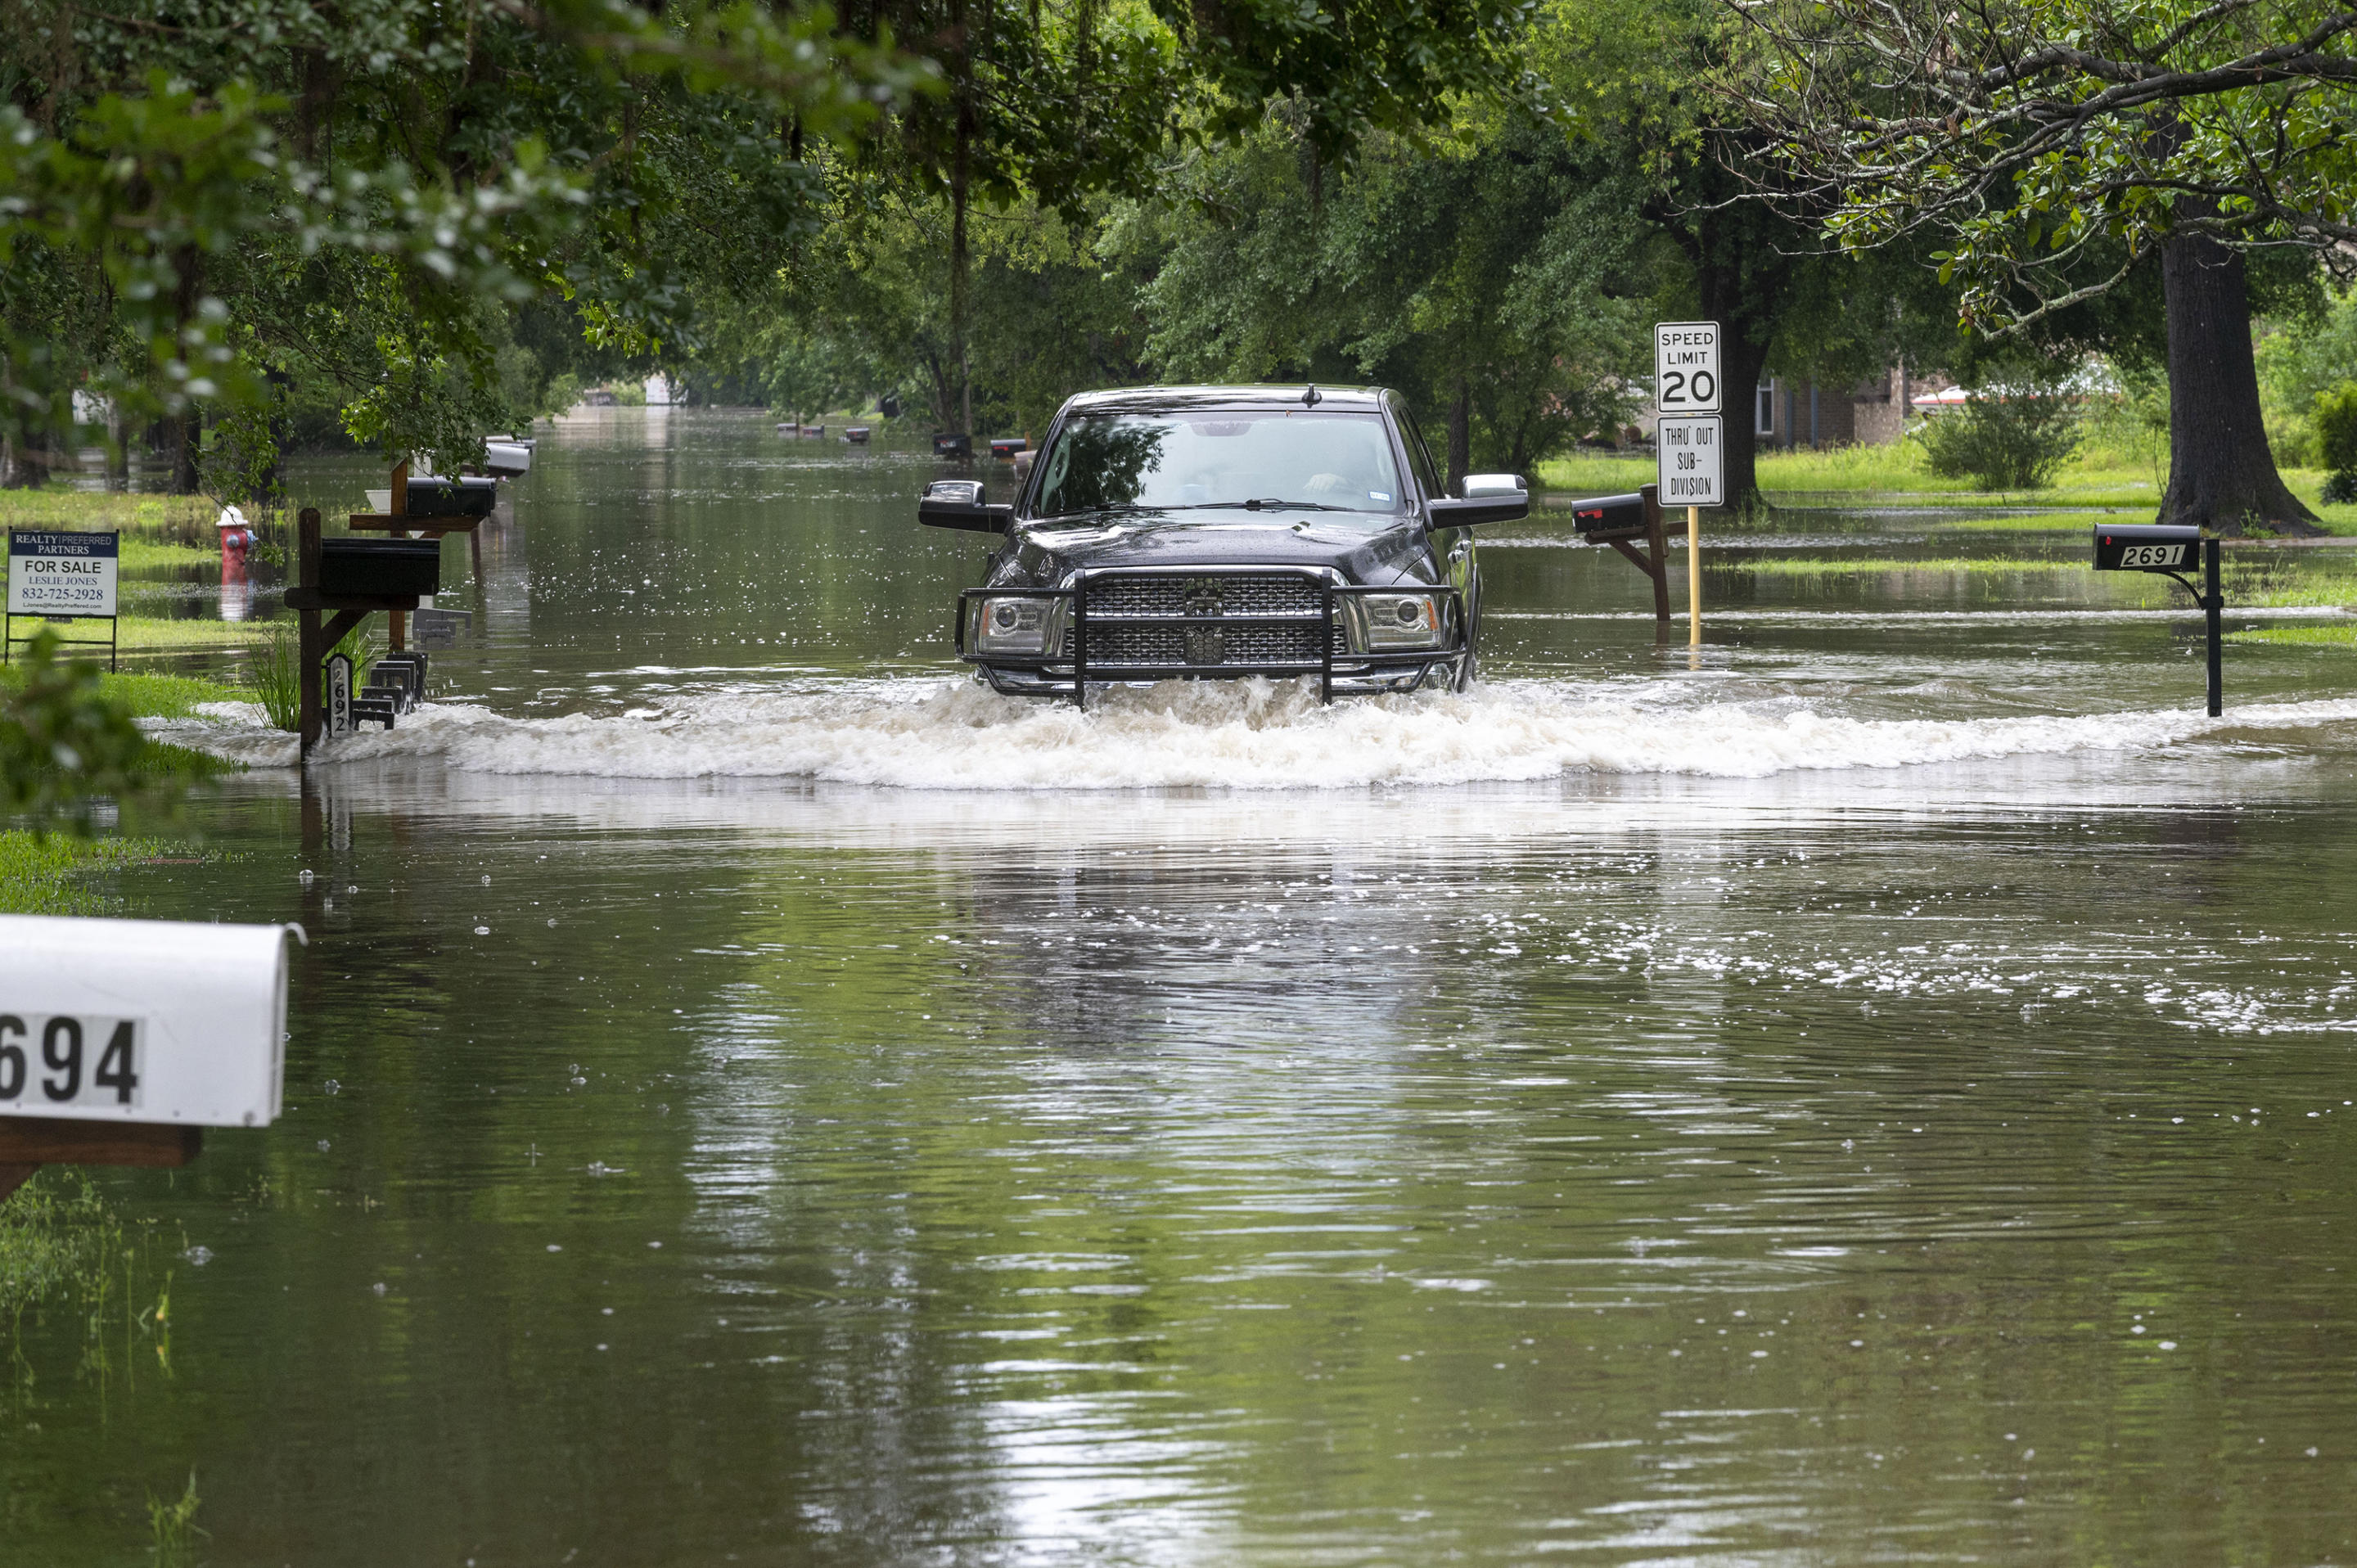 A pickup truck maneuvers a residential street filled with water.